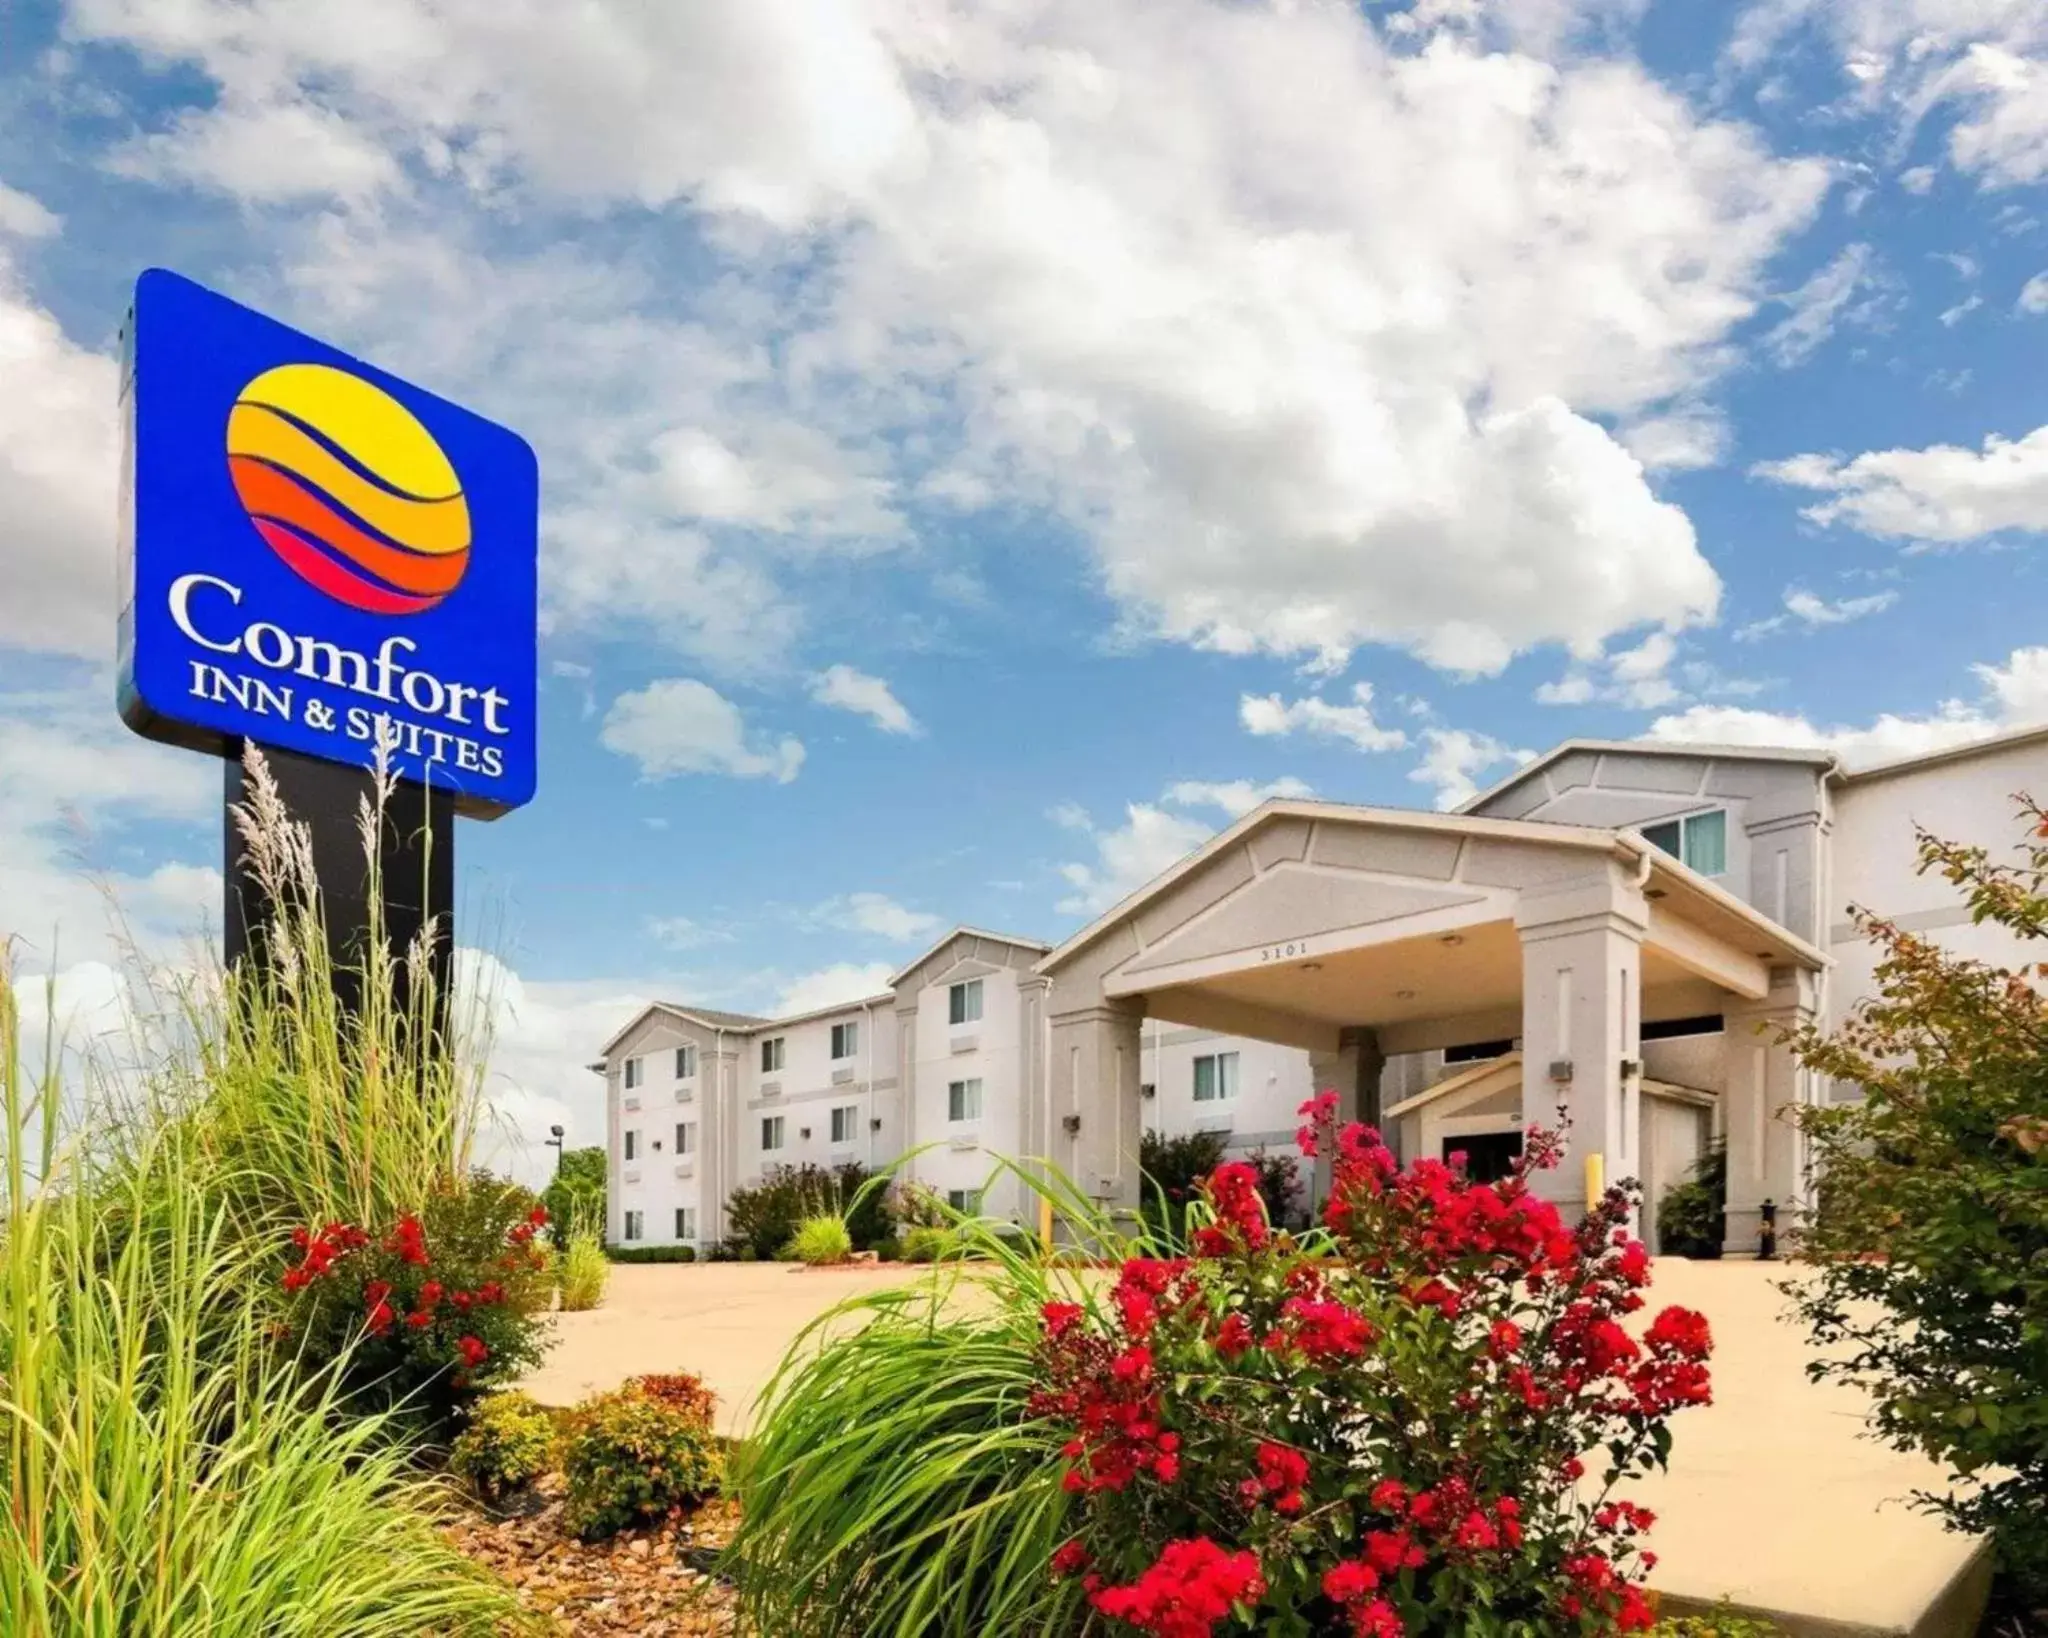 Property building in Comfort Inn & Suites Ponca City near Marland Mansion